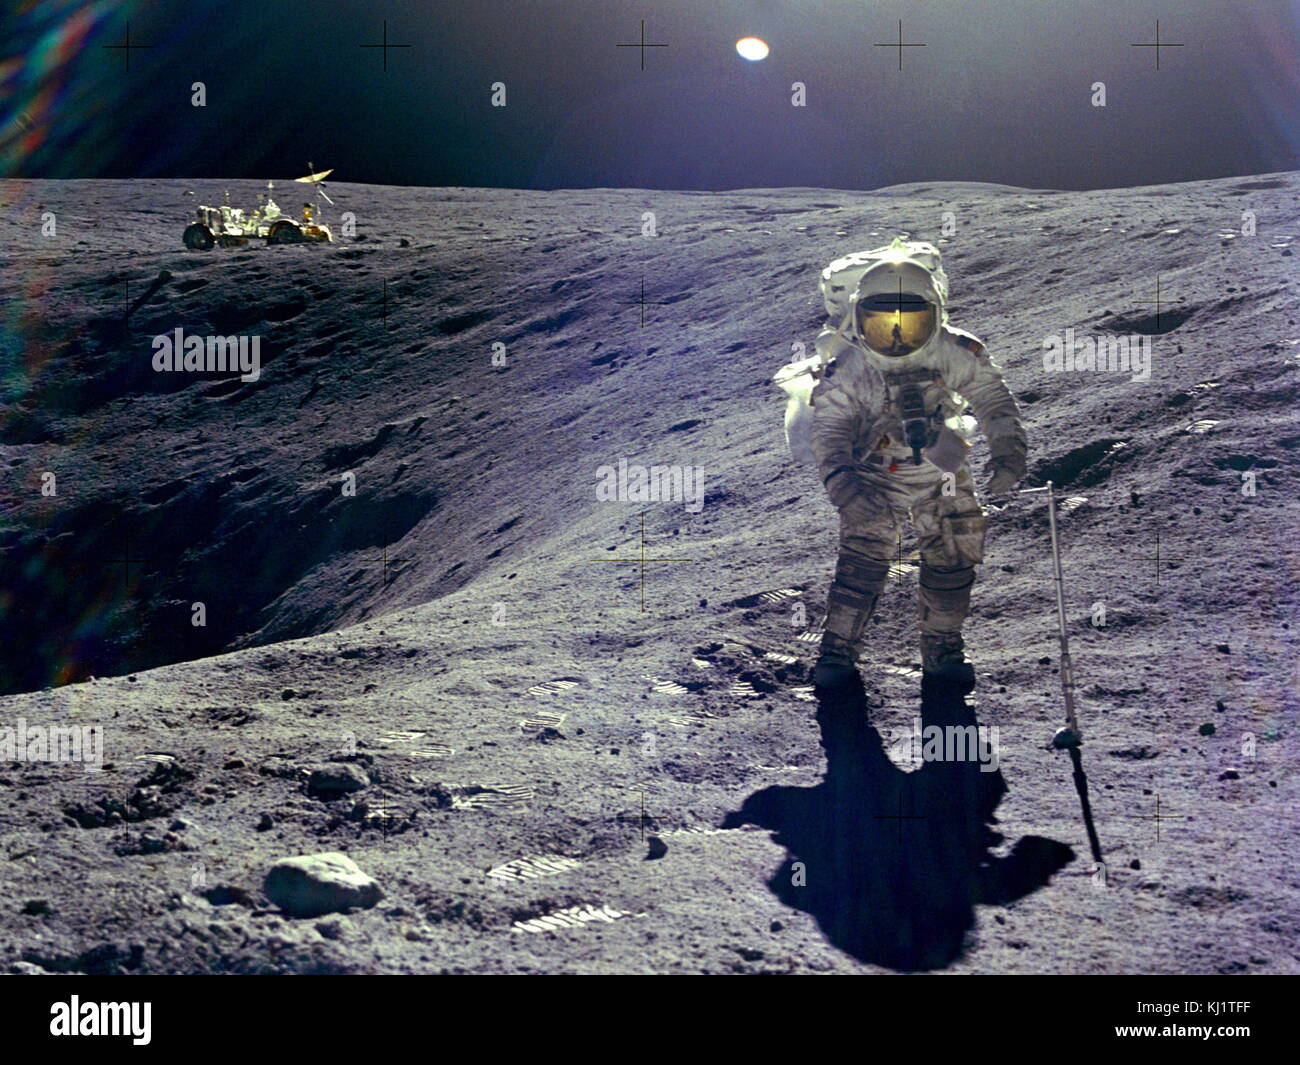 Astronaut Charles M. Duke, Jr., lunar module pilot of the Apollo 16 lunar landing mission, is photographed collecting lunar samples at Station no. 1 during the first Apollo 16 extravehicular activity at the Descartes landing site. This picture, looking eastward, was taken by Astronaut John W. Young, commander. Duke is standing at the rim of Plum crater, which is 40 meters in diameter and 10 meters deep. The parked Lunar Roving Vehicle can be seen in the left background. Stock Photo